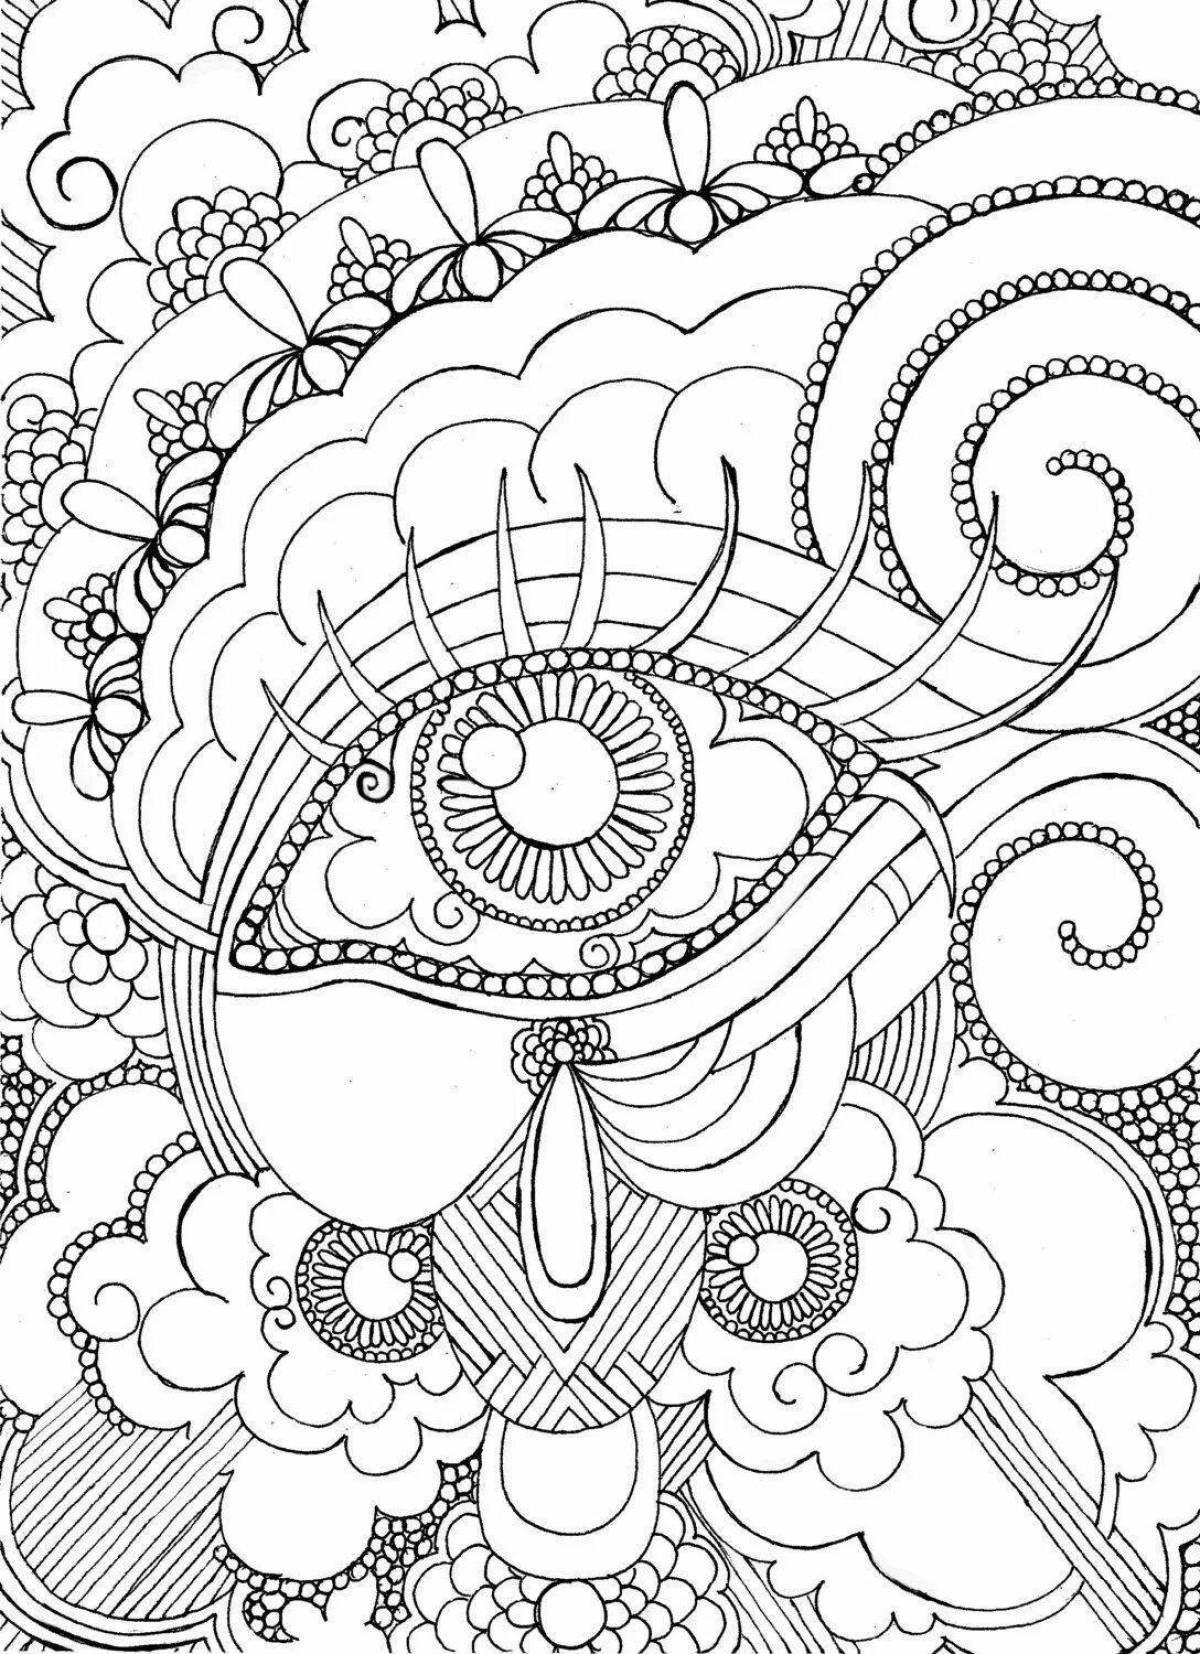 Nerves soothing coloring book